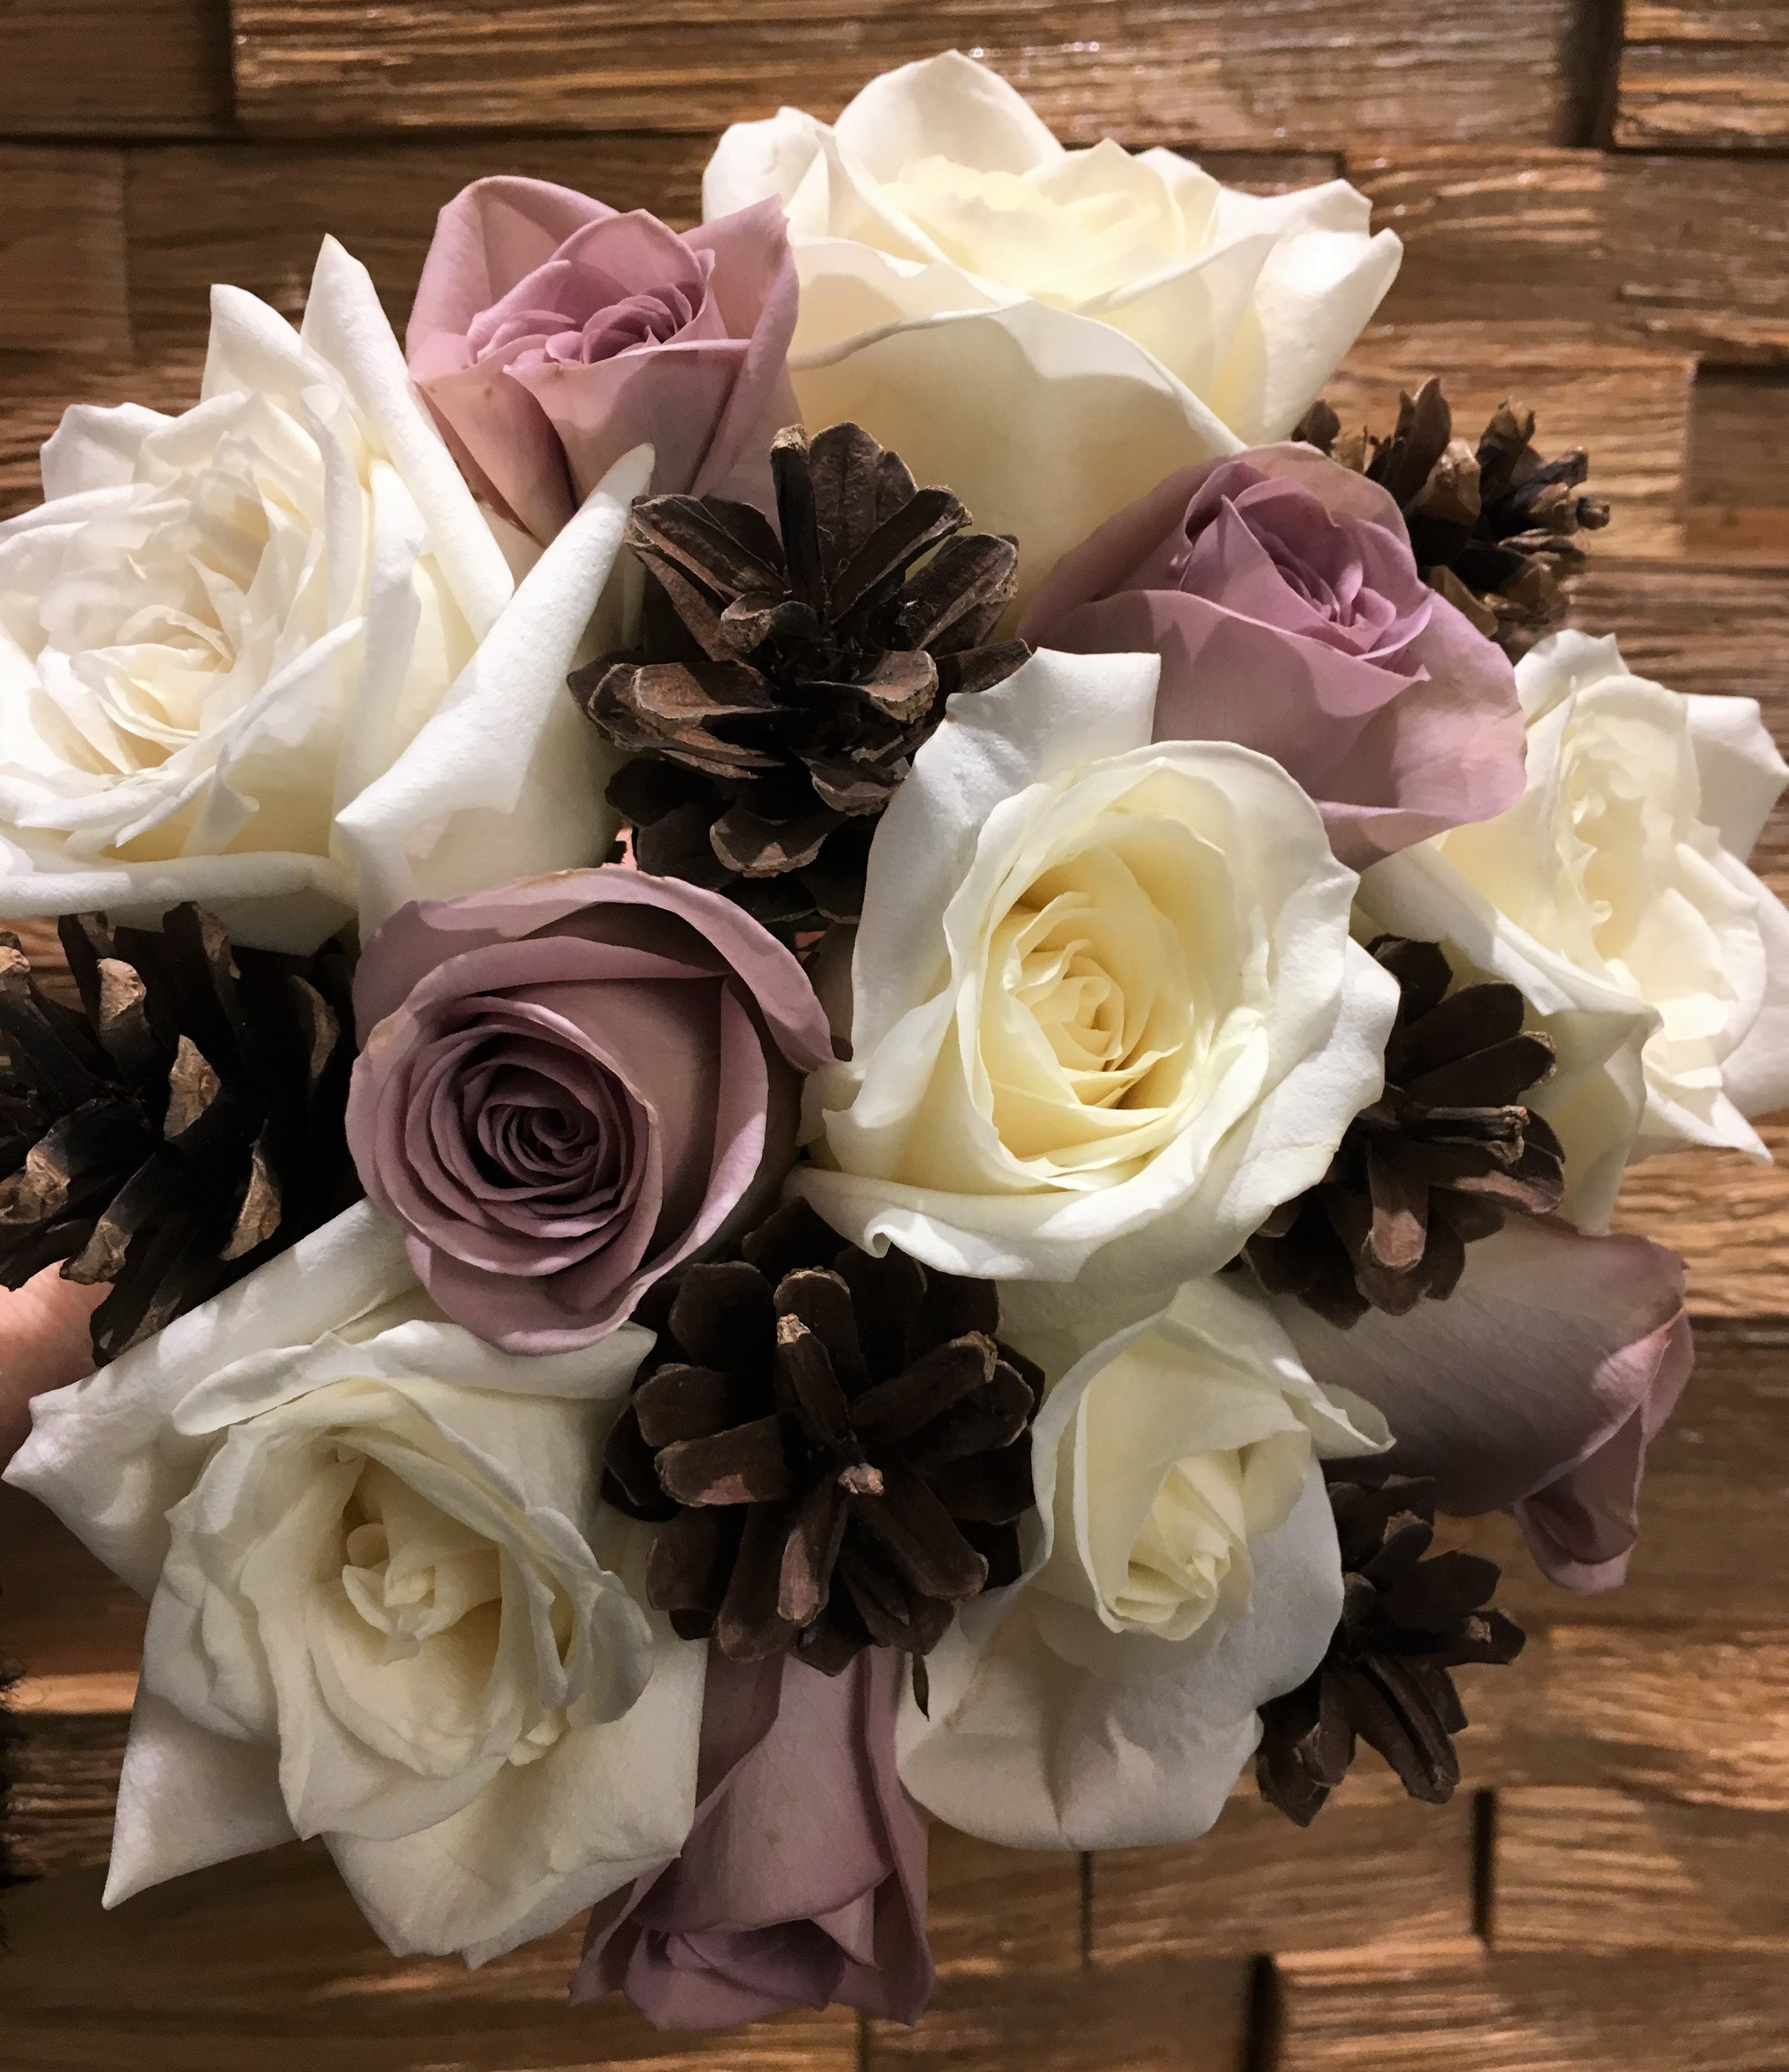 cone and roses in a rustic style wedding flowers